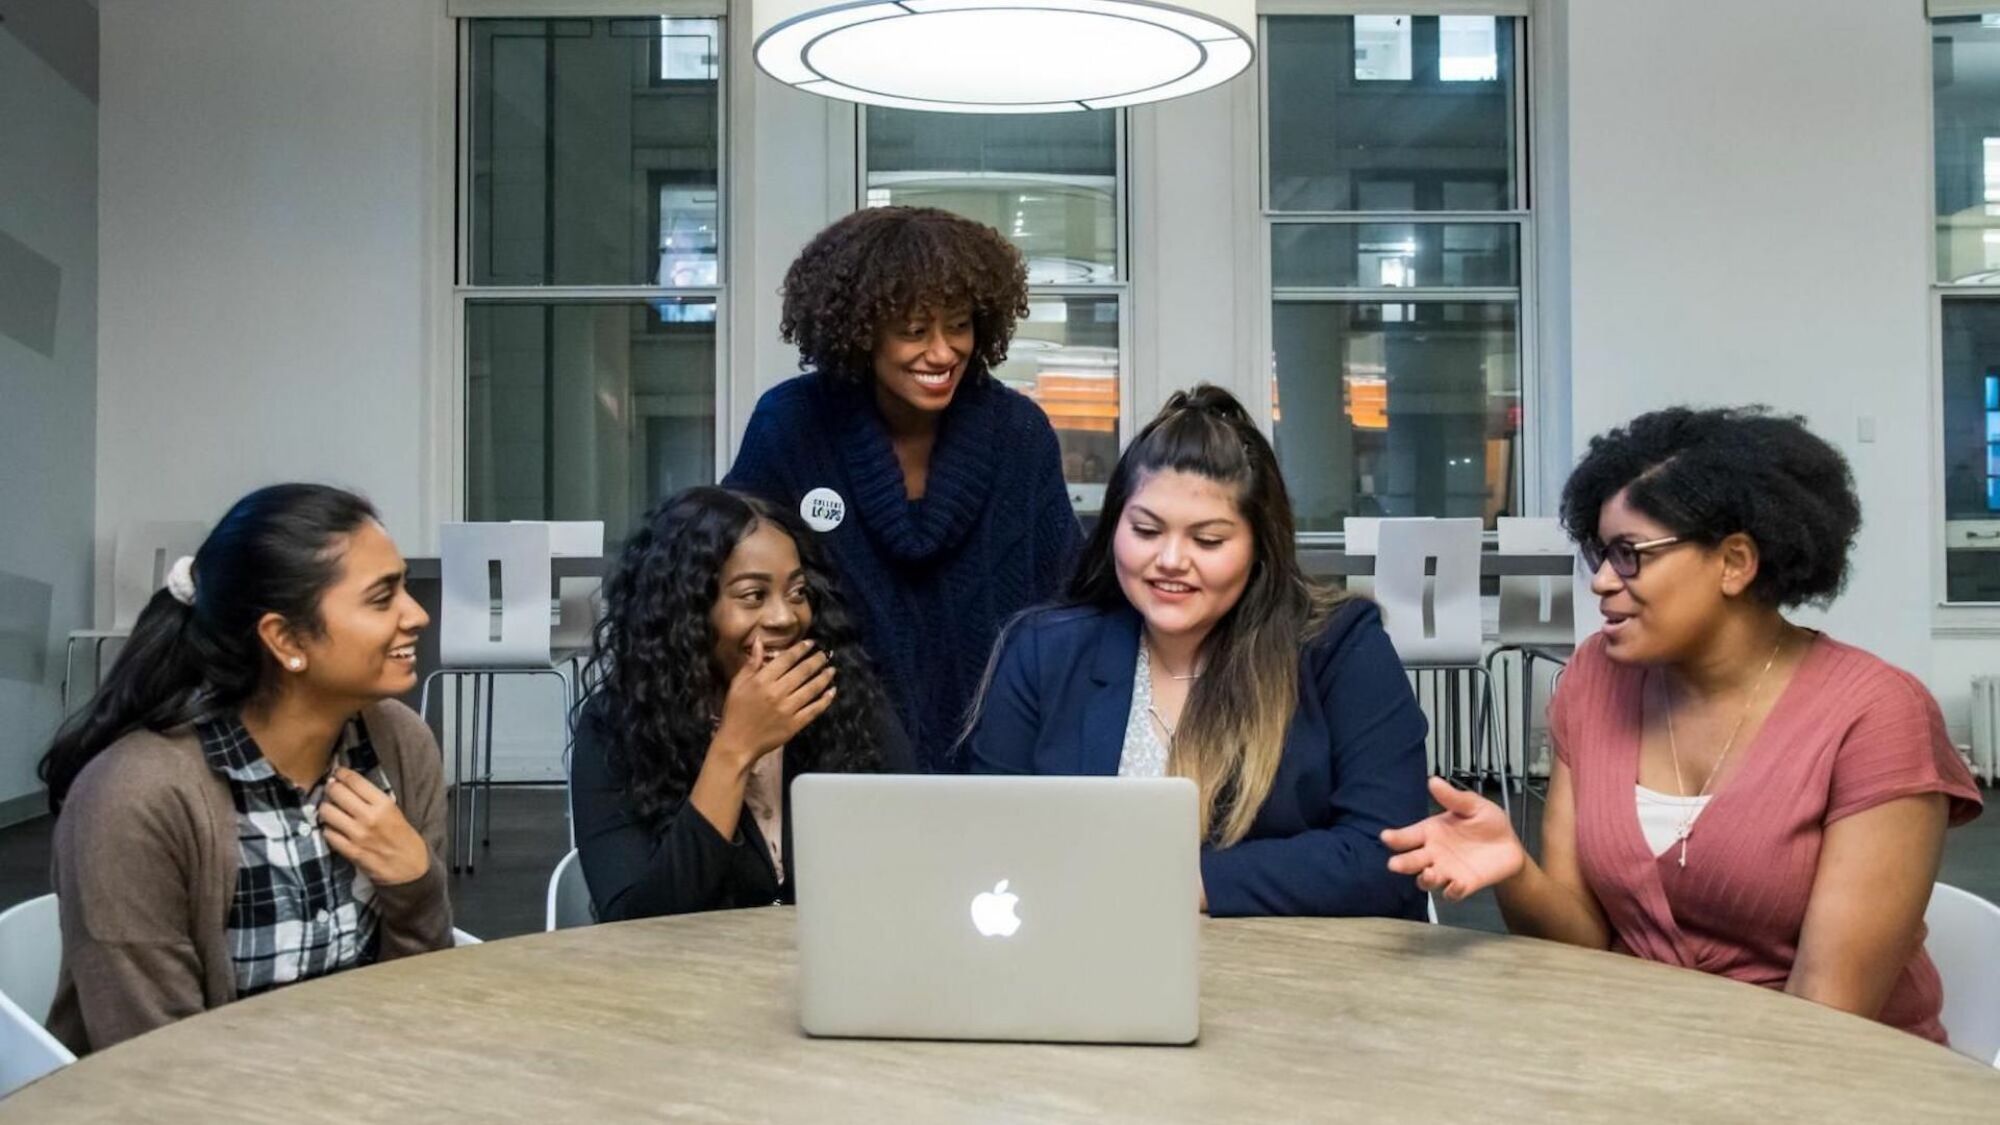 Five women stand around a laptop in an office smiling.